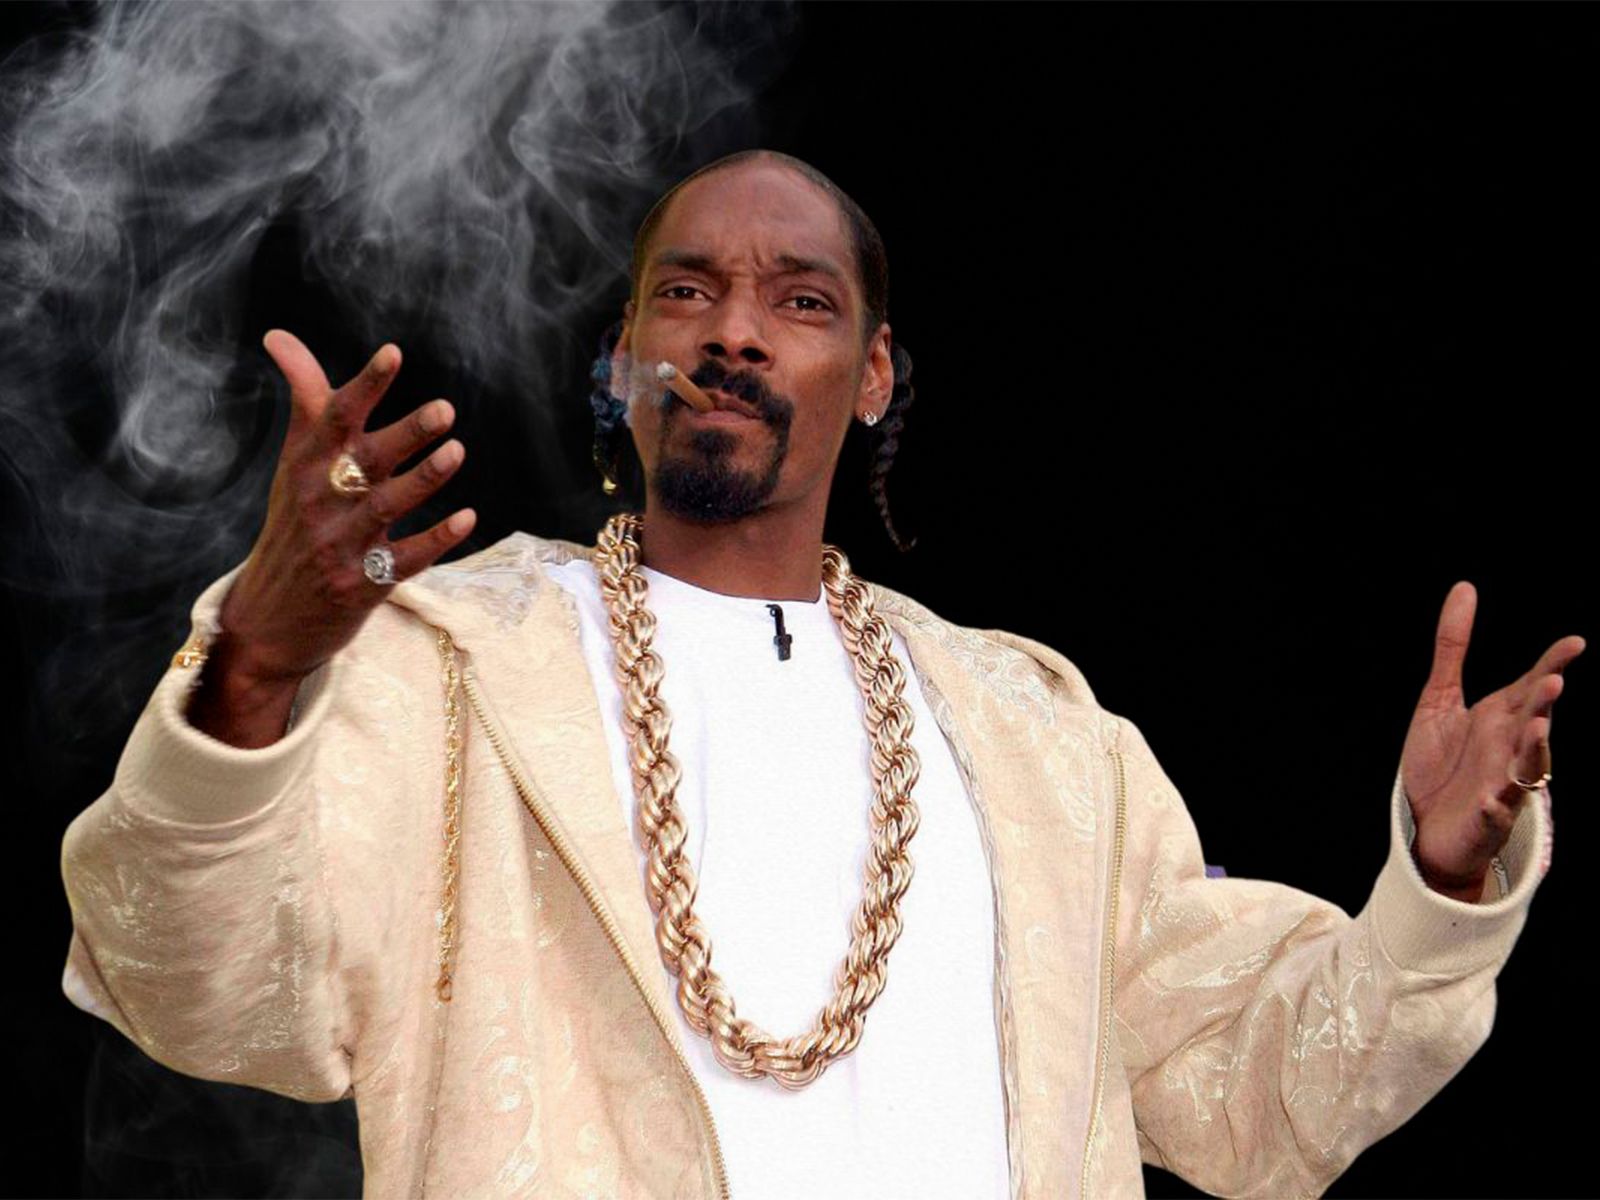 Death Row Cannabis is Snoop Dogg’s new offering